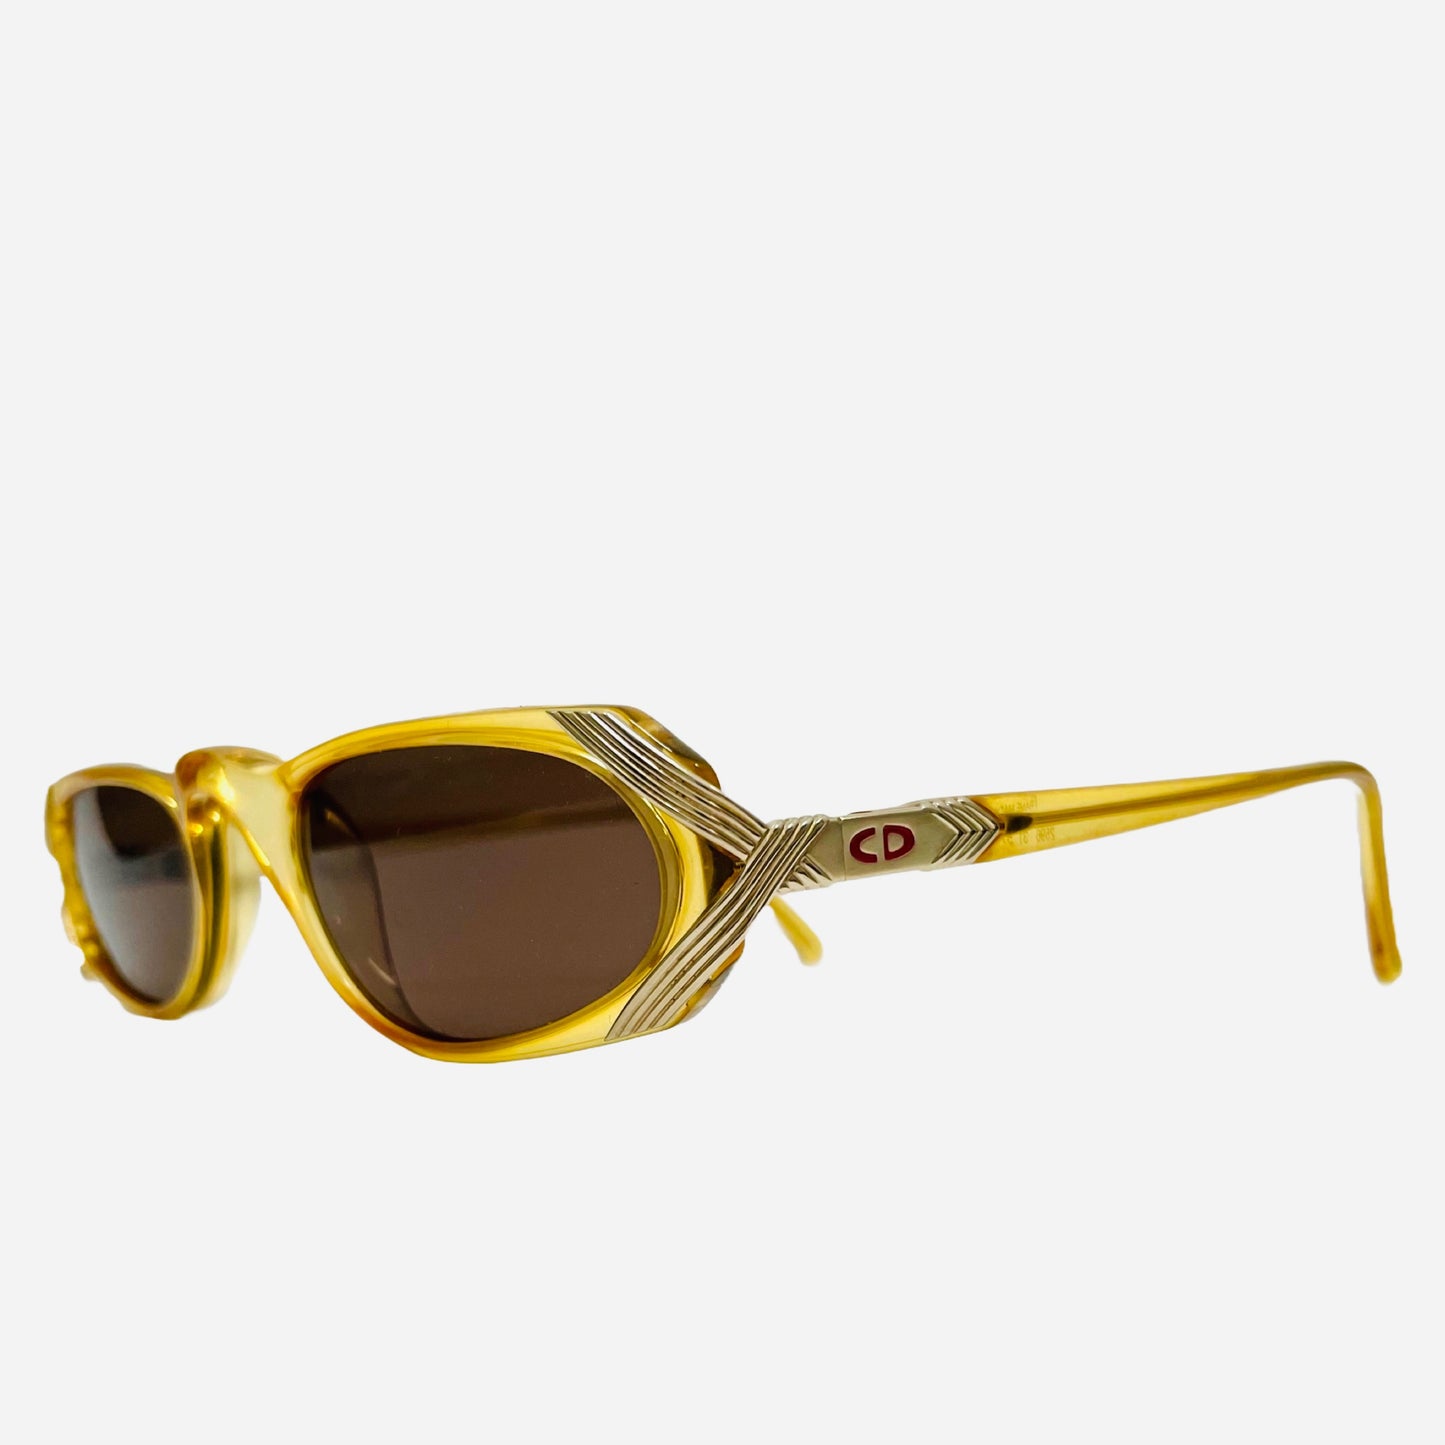 Vintage-Christian-Dior-Sonnenbrille-Sonnenbrille-2596-Optyl-the-seekers-side